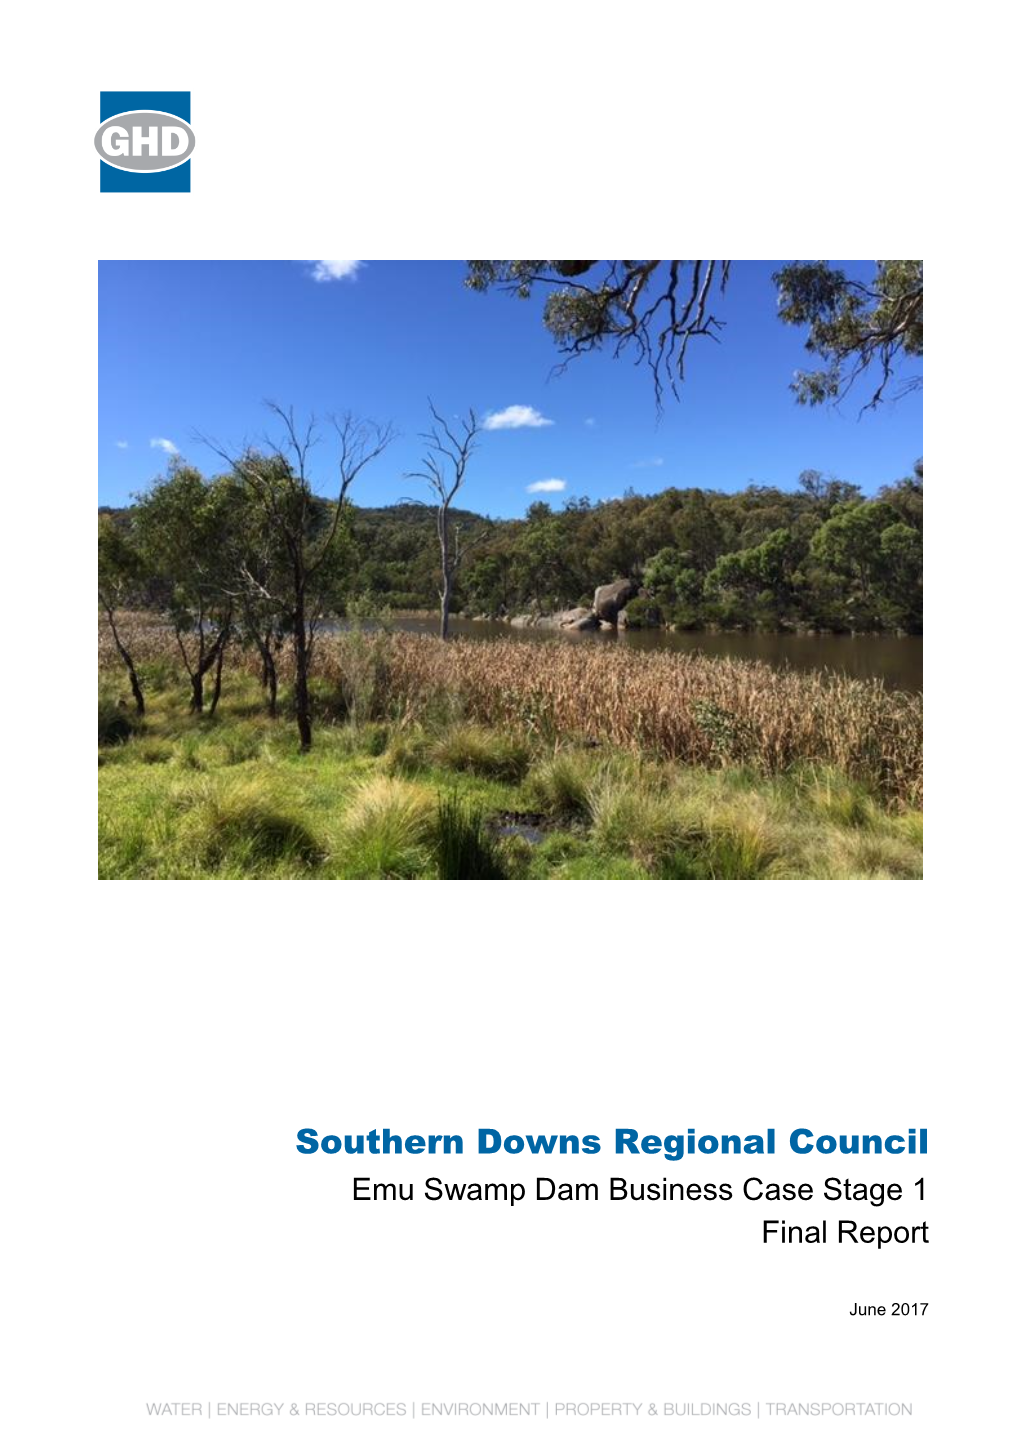 Emu Swamp Dam Business Case Stage 1 Final Report 20170602